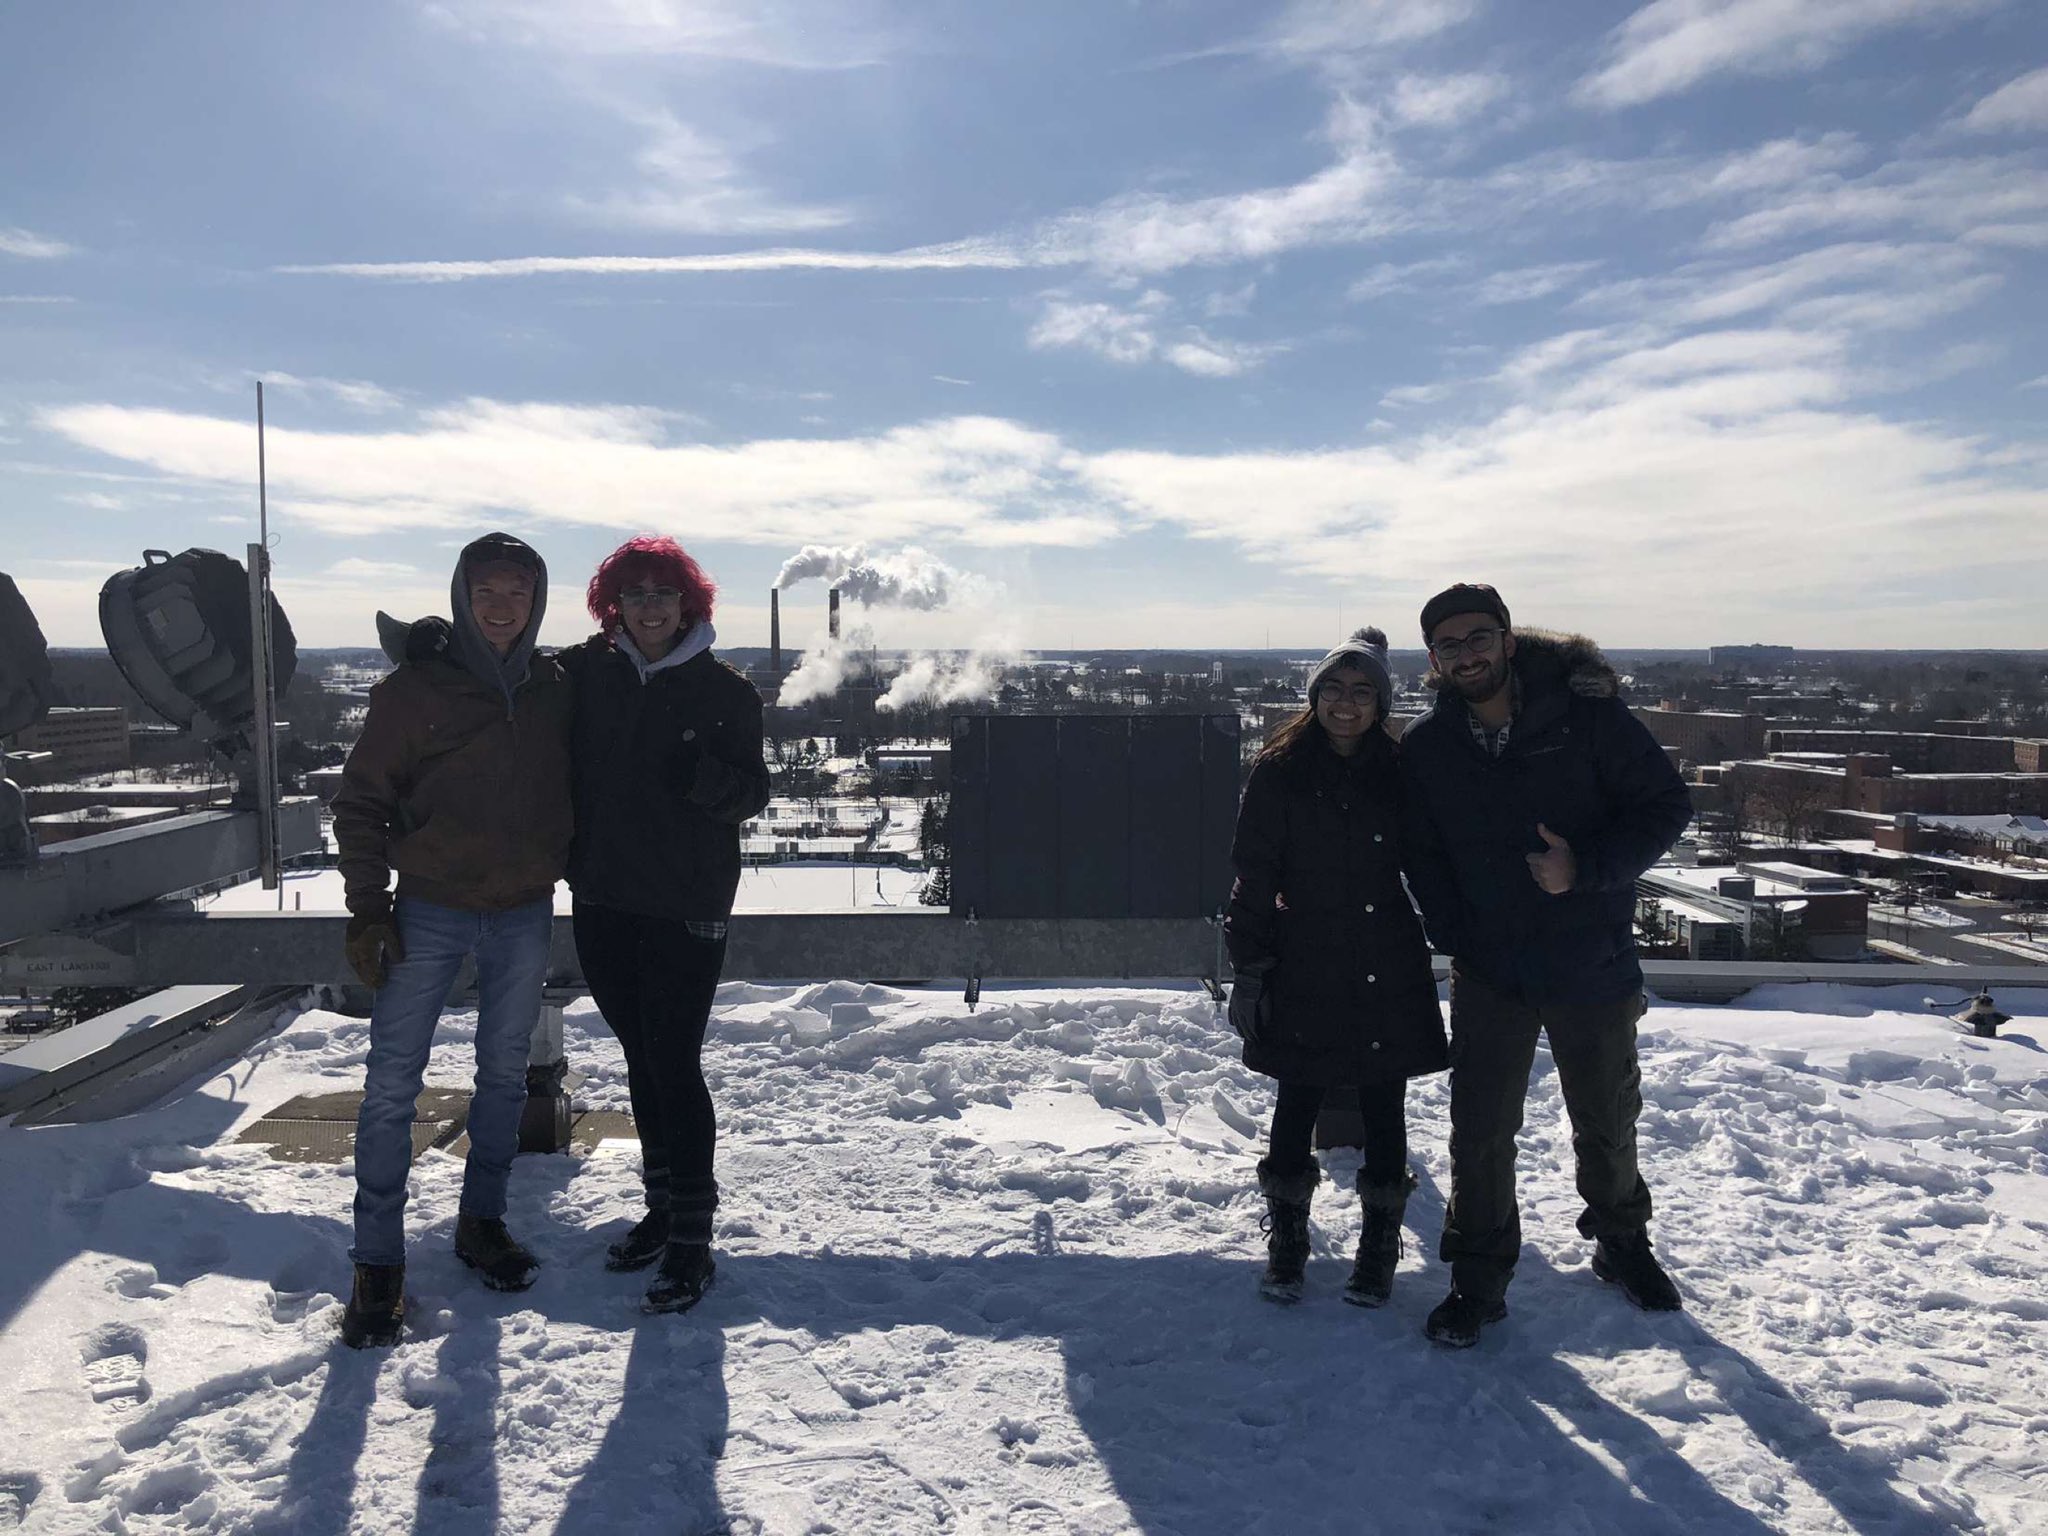 Four people standing on a snow-covered roof with blue sky and clouds.